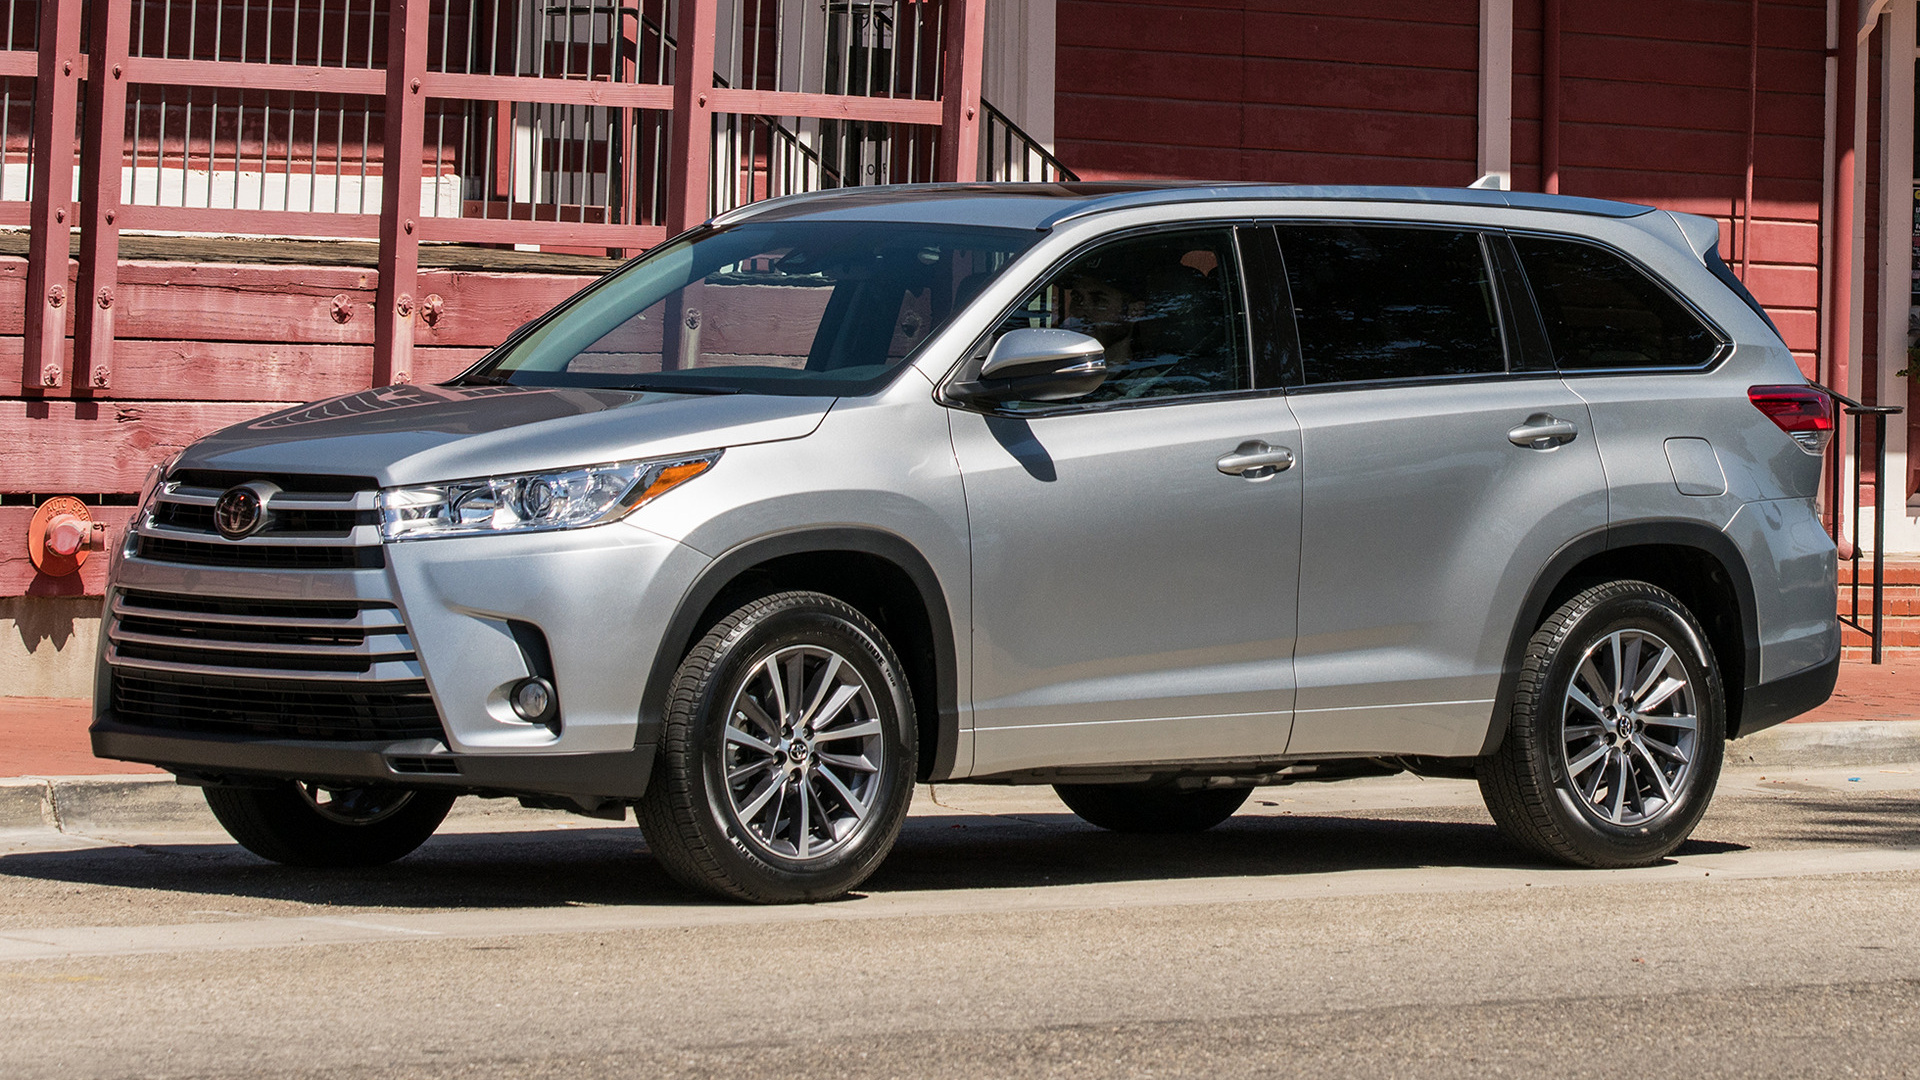 Toyota Highlander XLE and HD Image